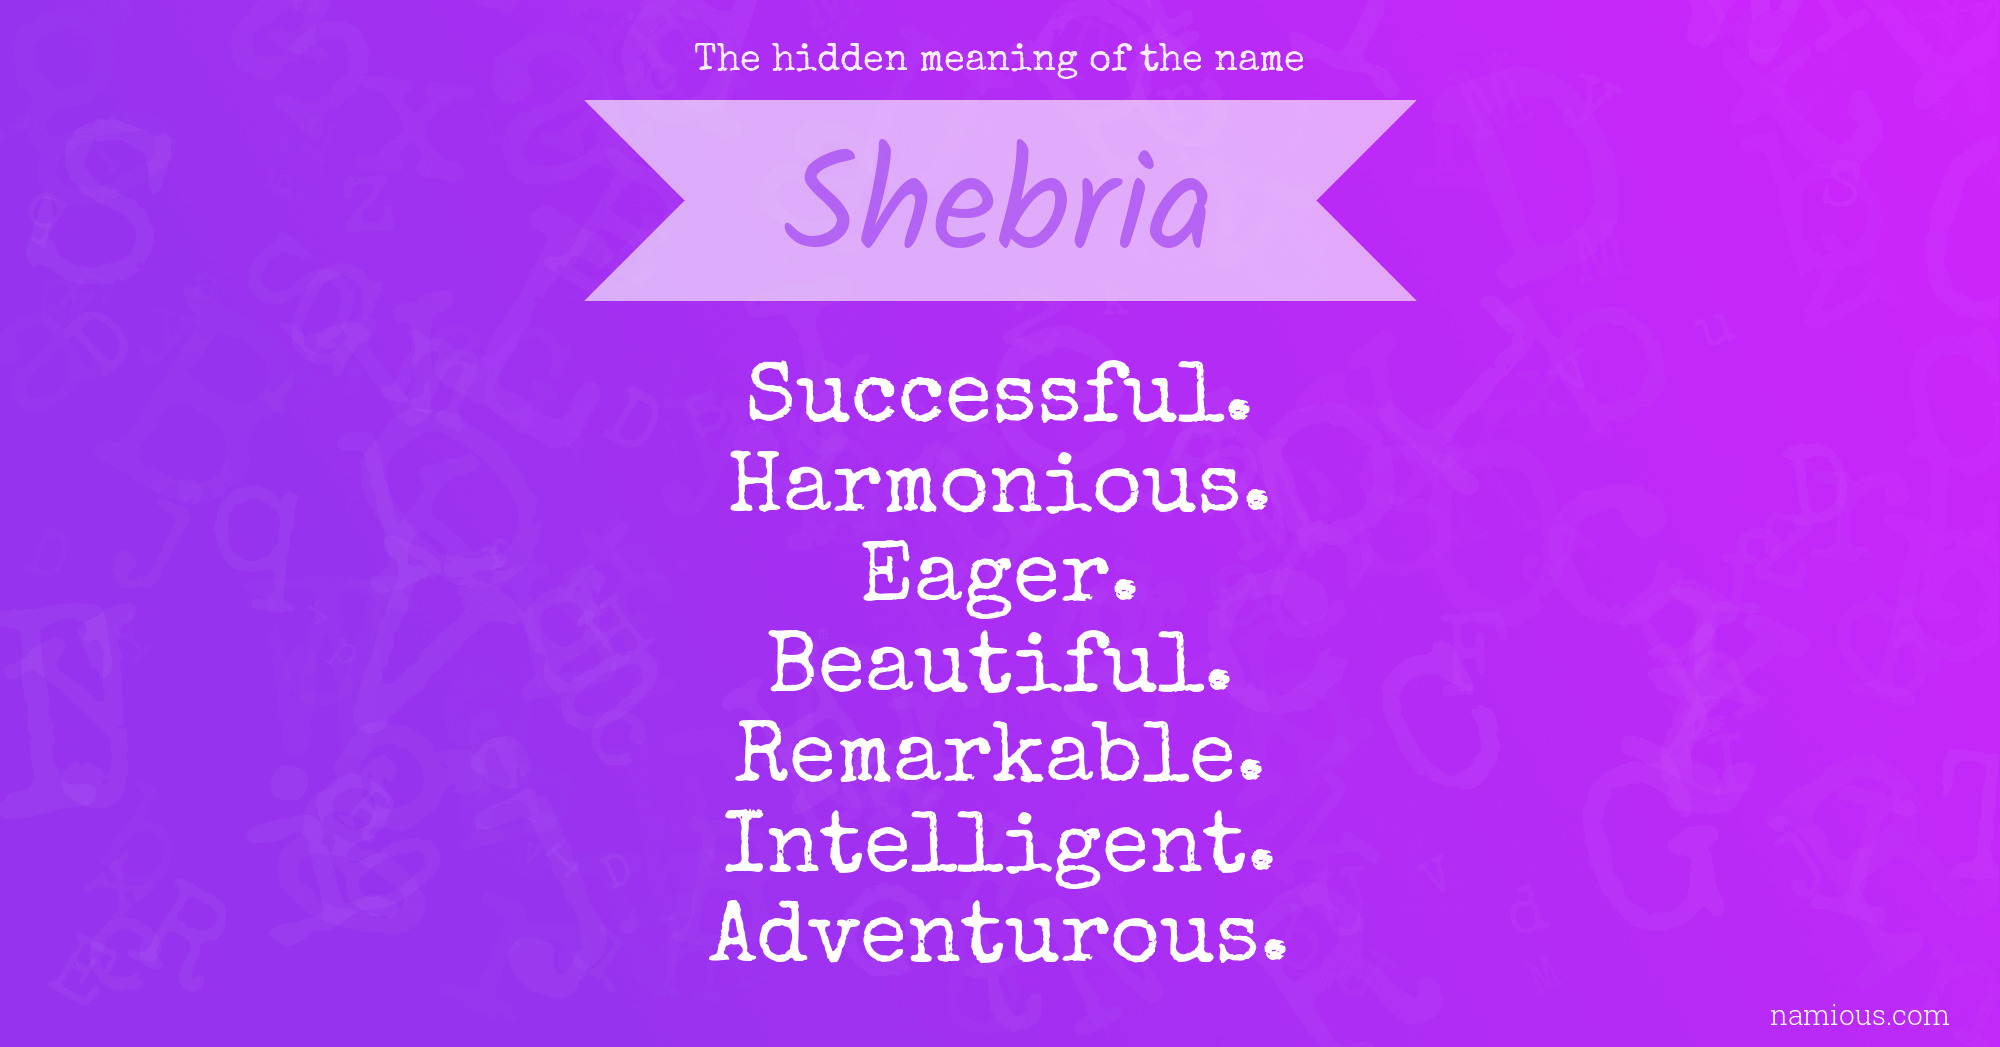 The hidden meaning of the name Shebria